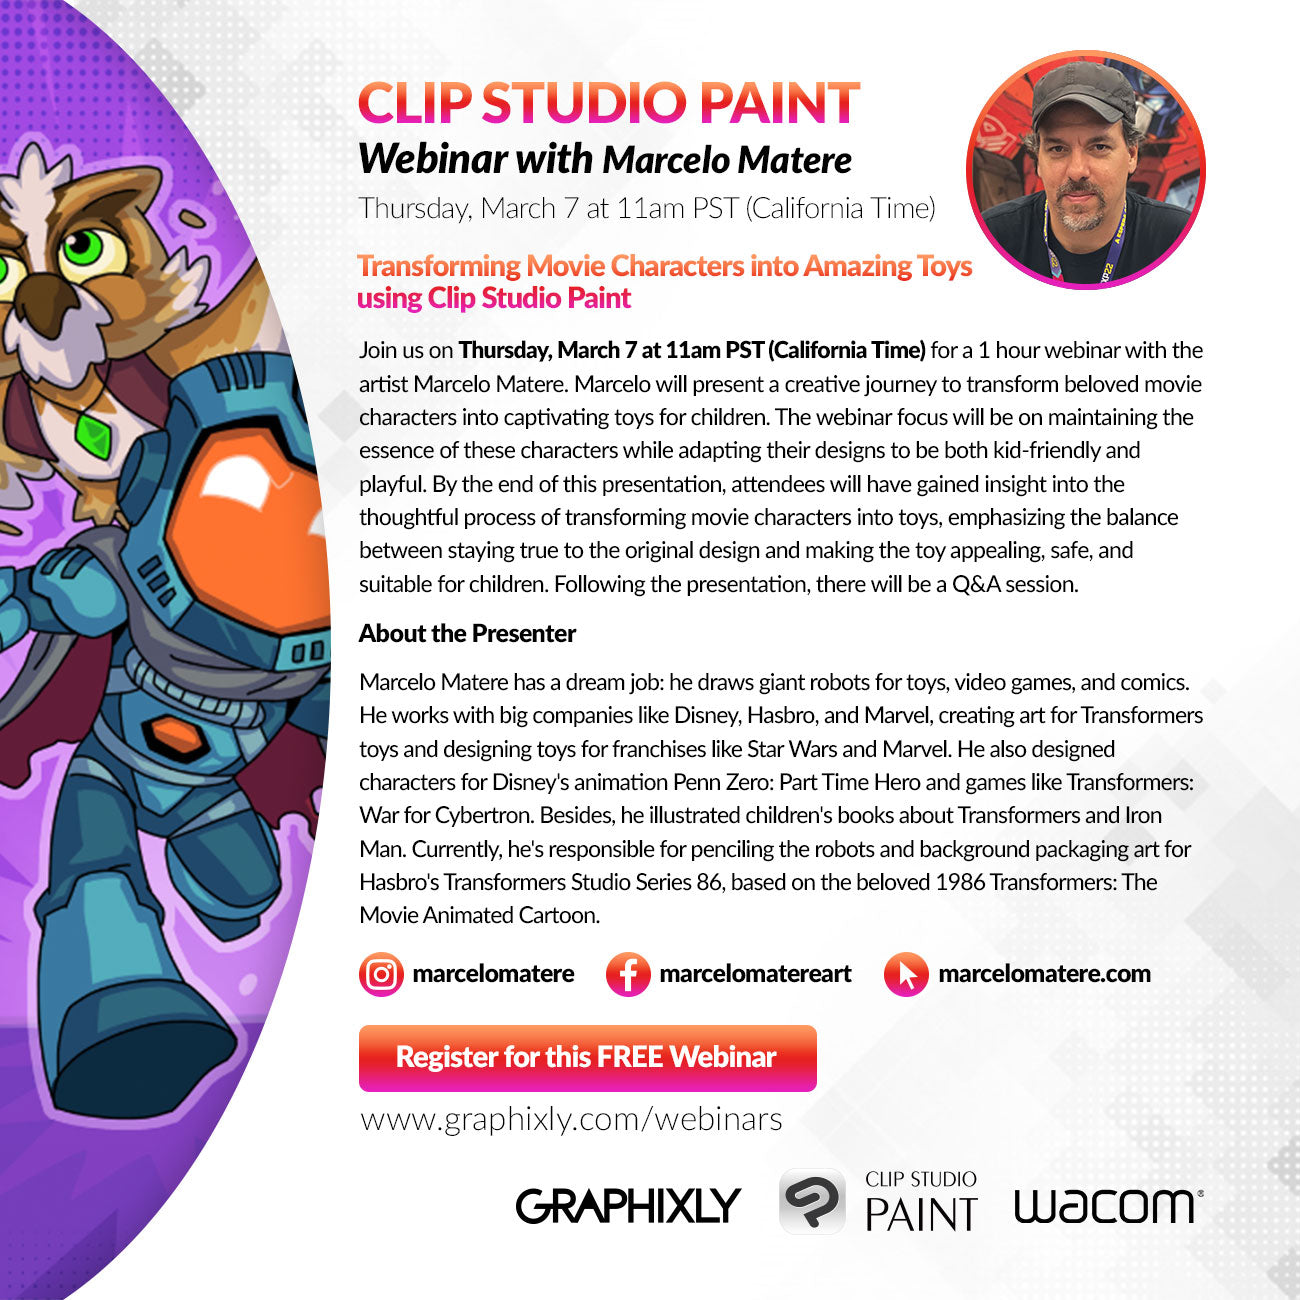 WEBINAR – Transforming Movie Characters into Amazing Toys using Clip Studio Paint with Marcelo Matere